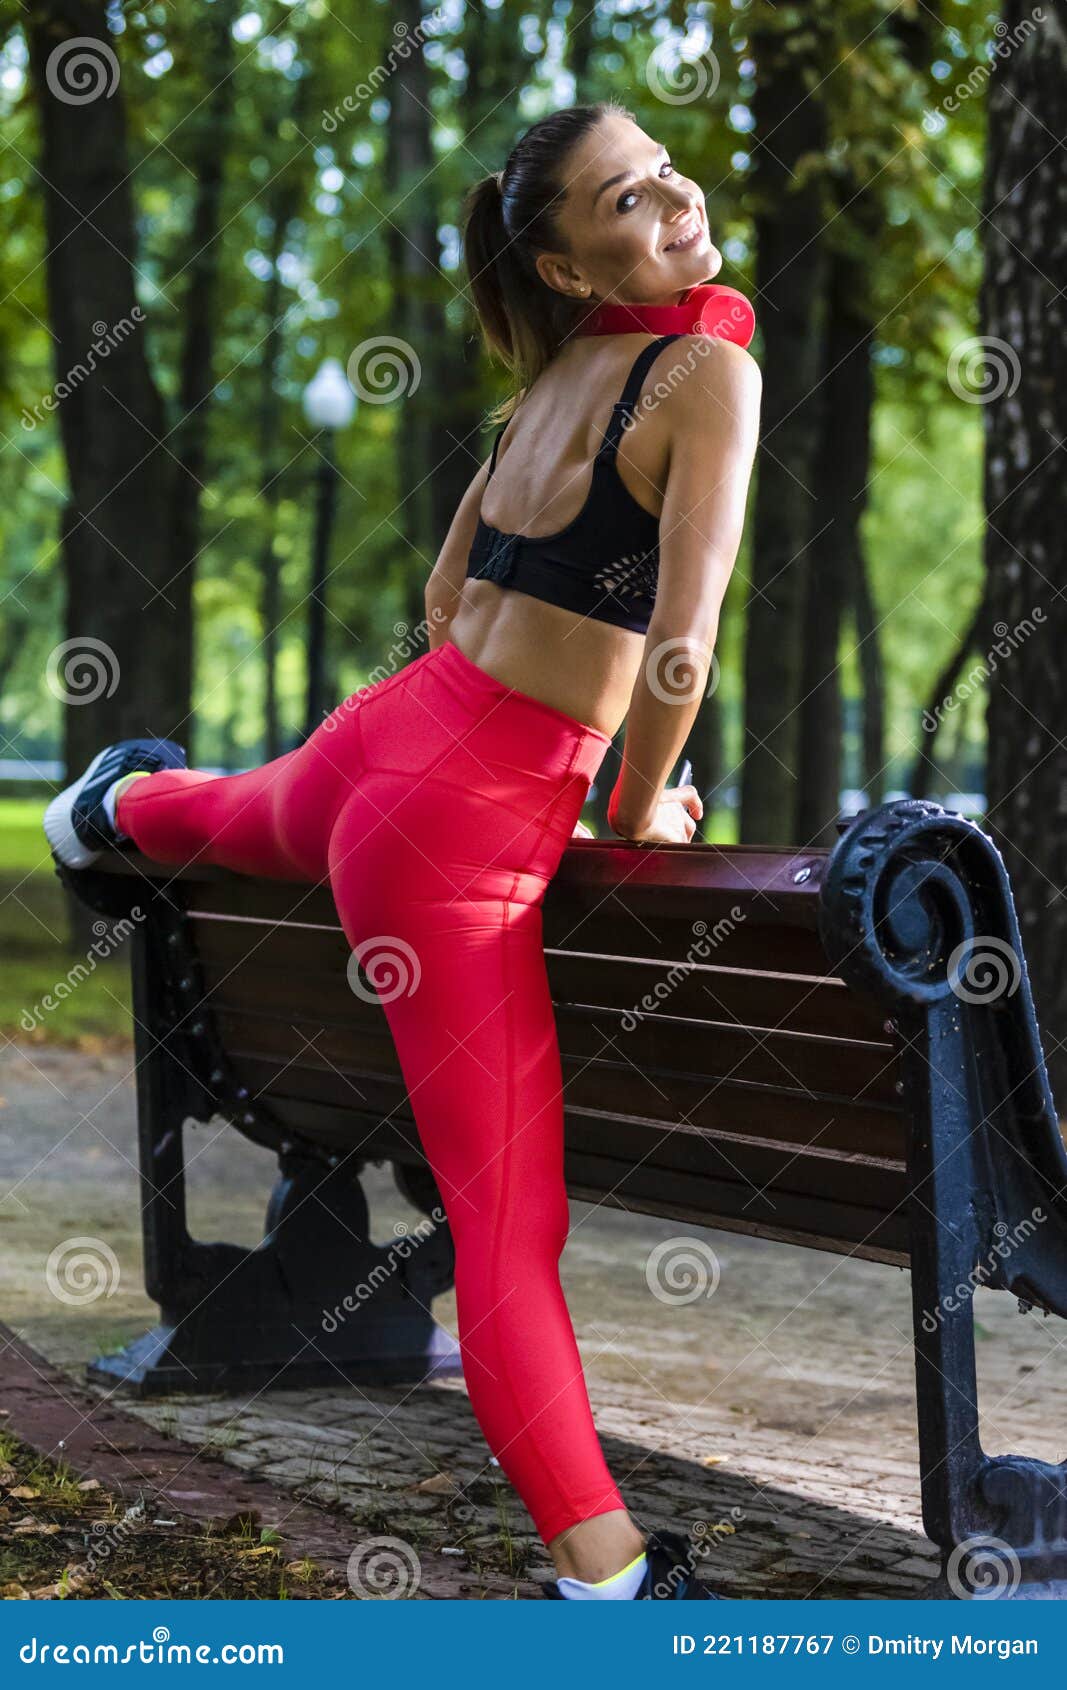 Melody Wear Workout Tight Cheap Red Leggings Fitness Women's